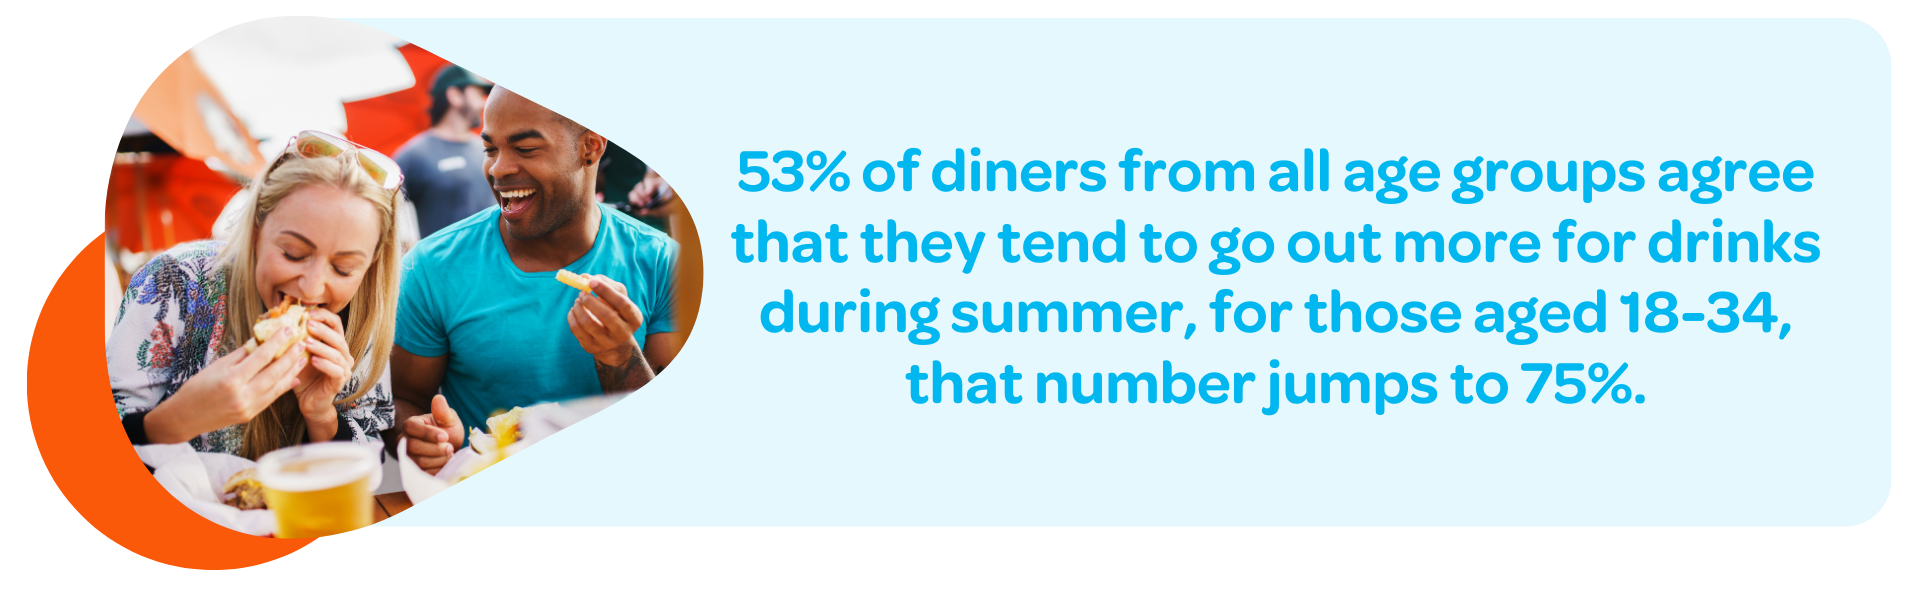 53% of diners from all age groups agree that they tend to go out more for drinks during summer, for those aged 18-34, that number jumps to 75%